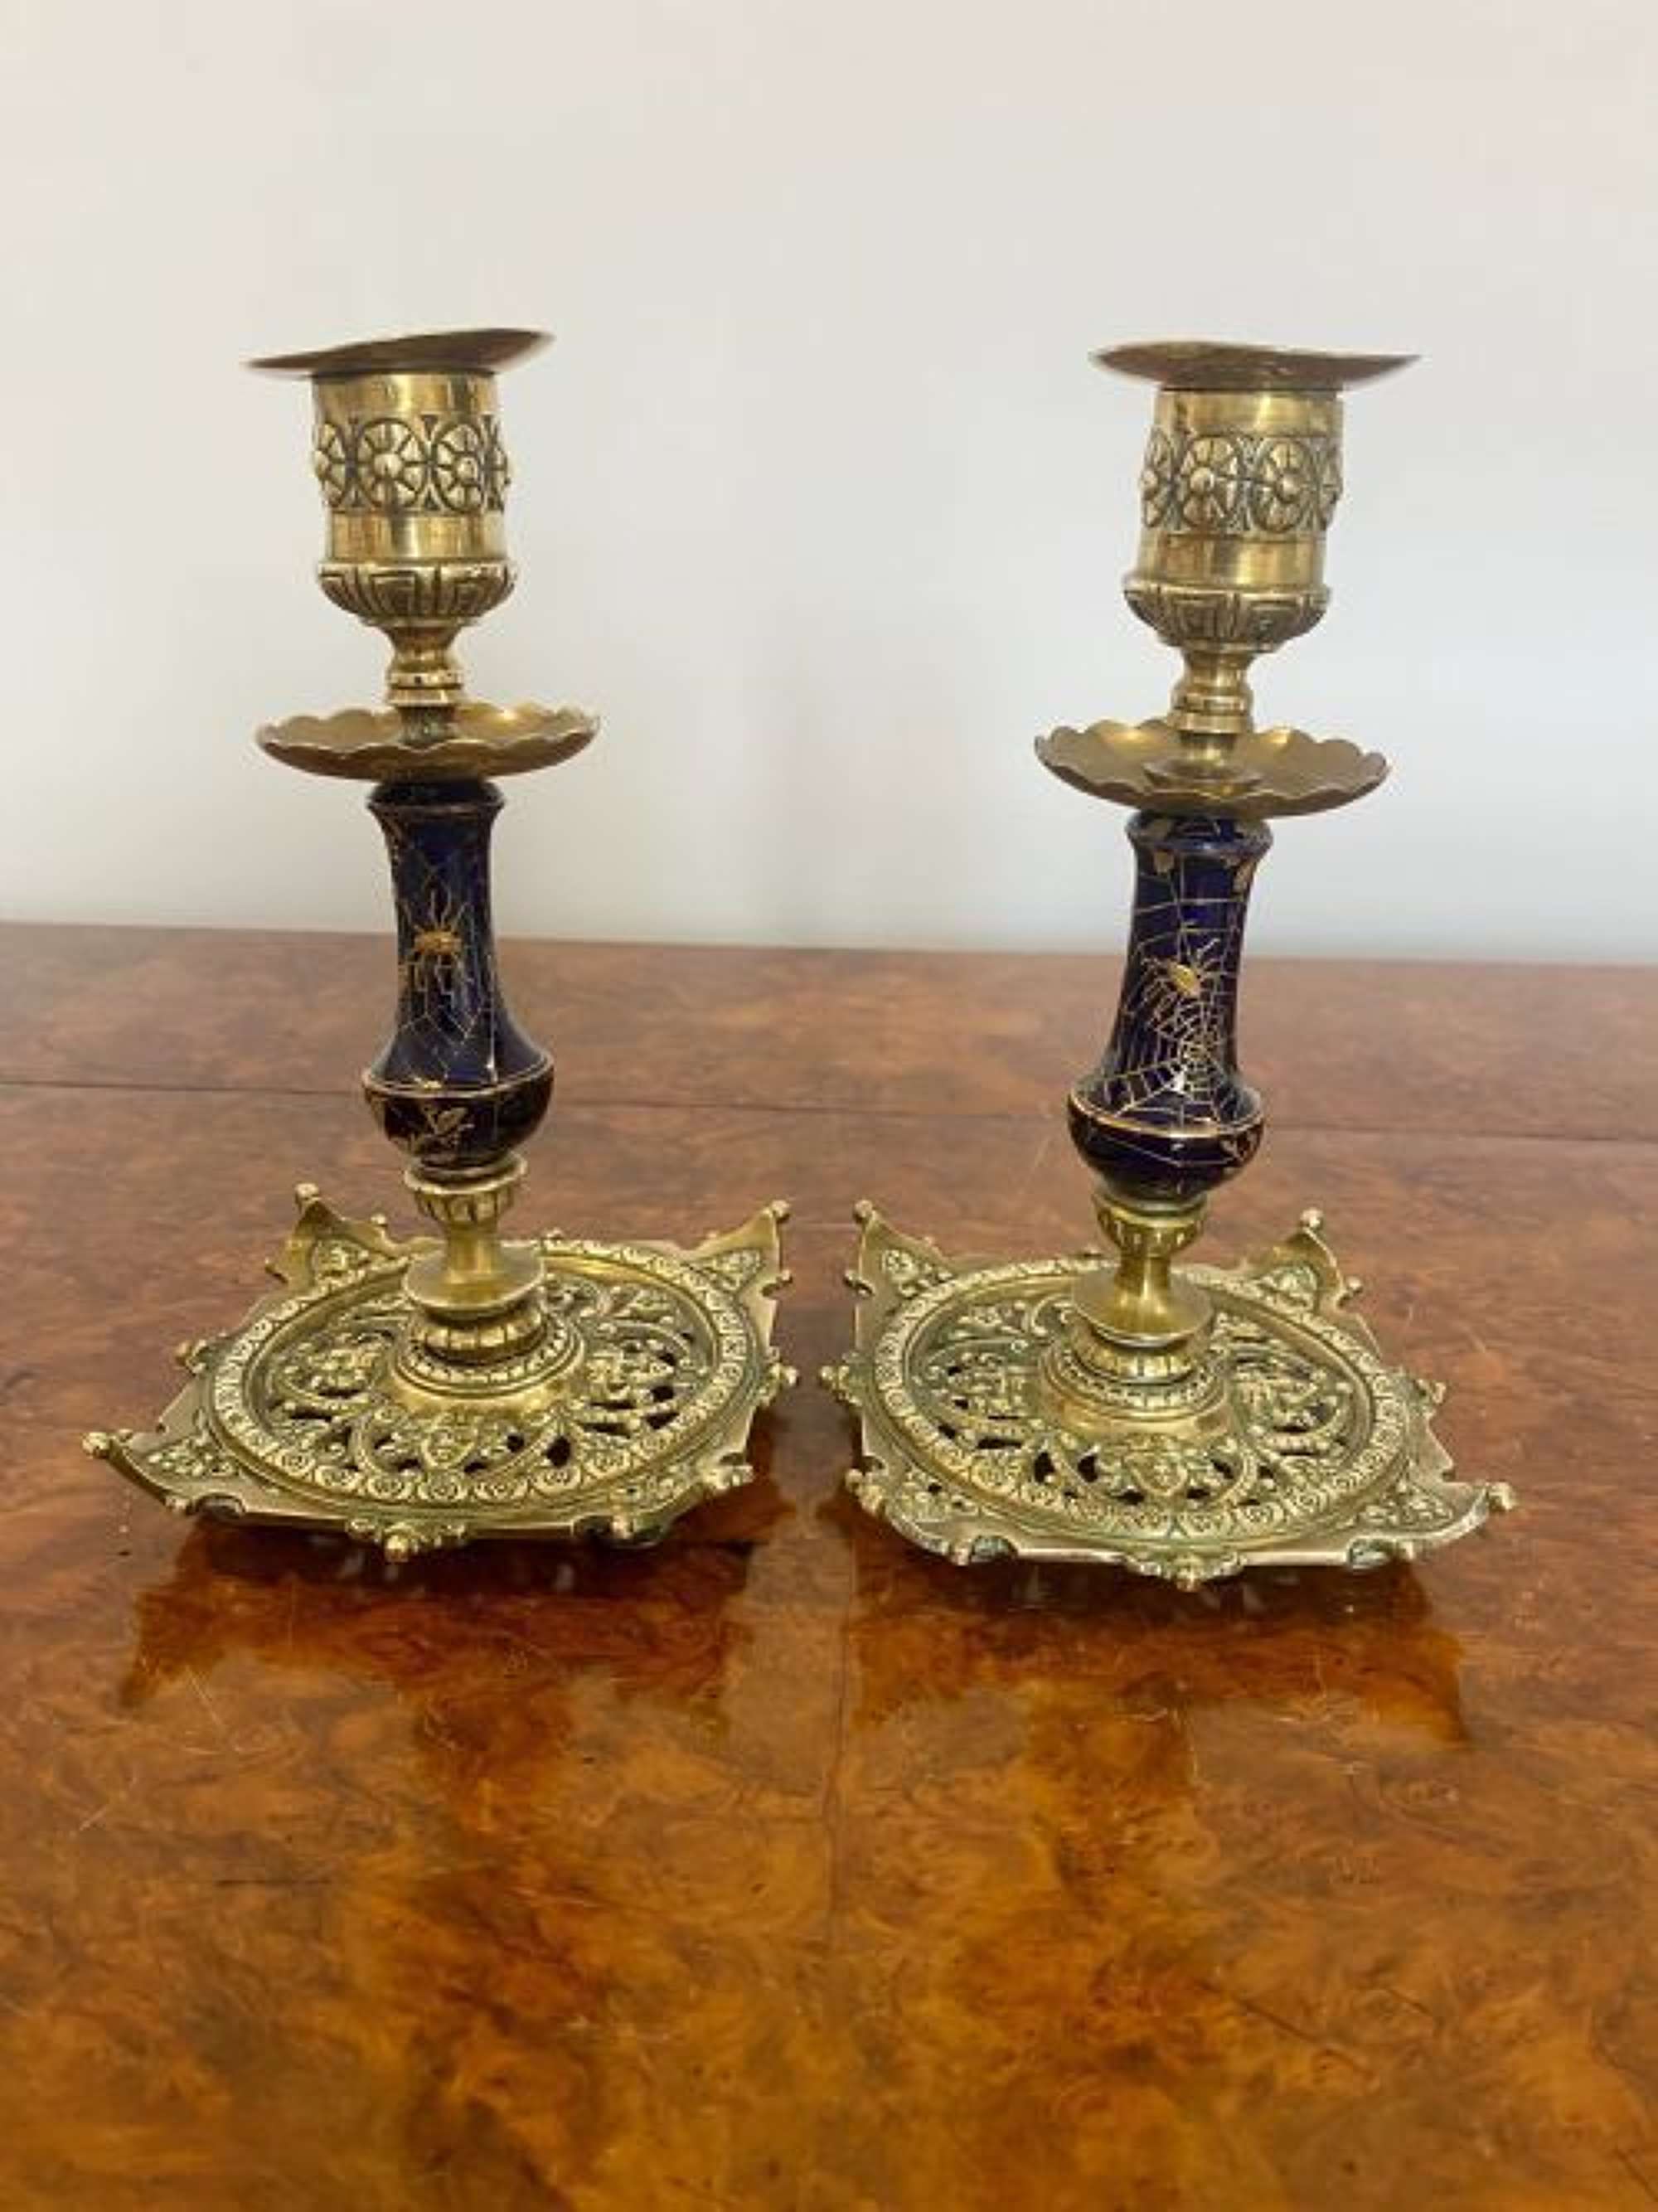 Unusual Pair Of Antique Victorian Quality Brass & Porcelain Candlesticks